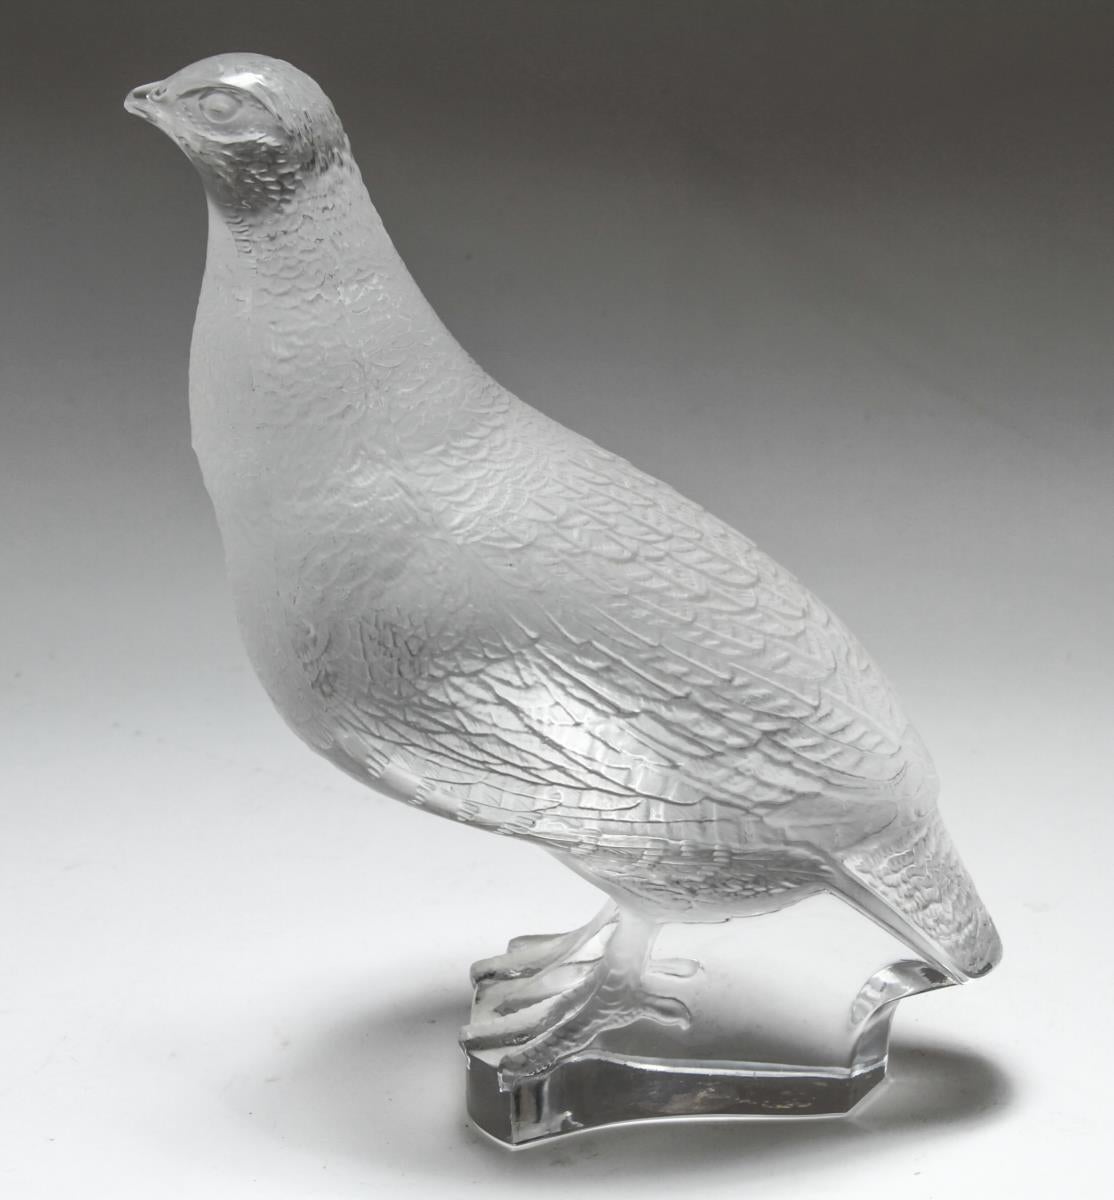 French Lalique frosted crystal art glass partridge figurine with etched signature underneath. The piece was made in France and is in great vintage condition.